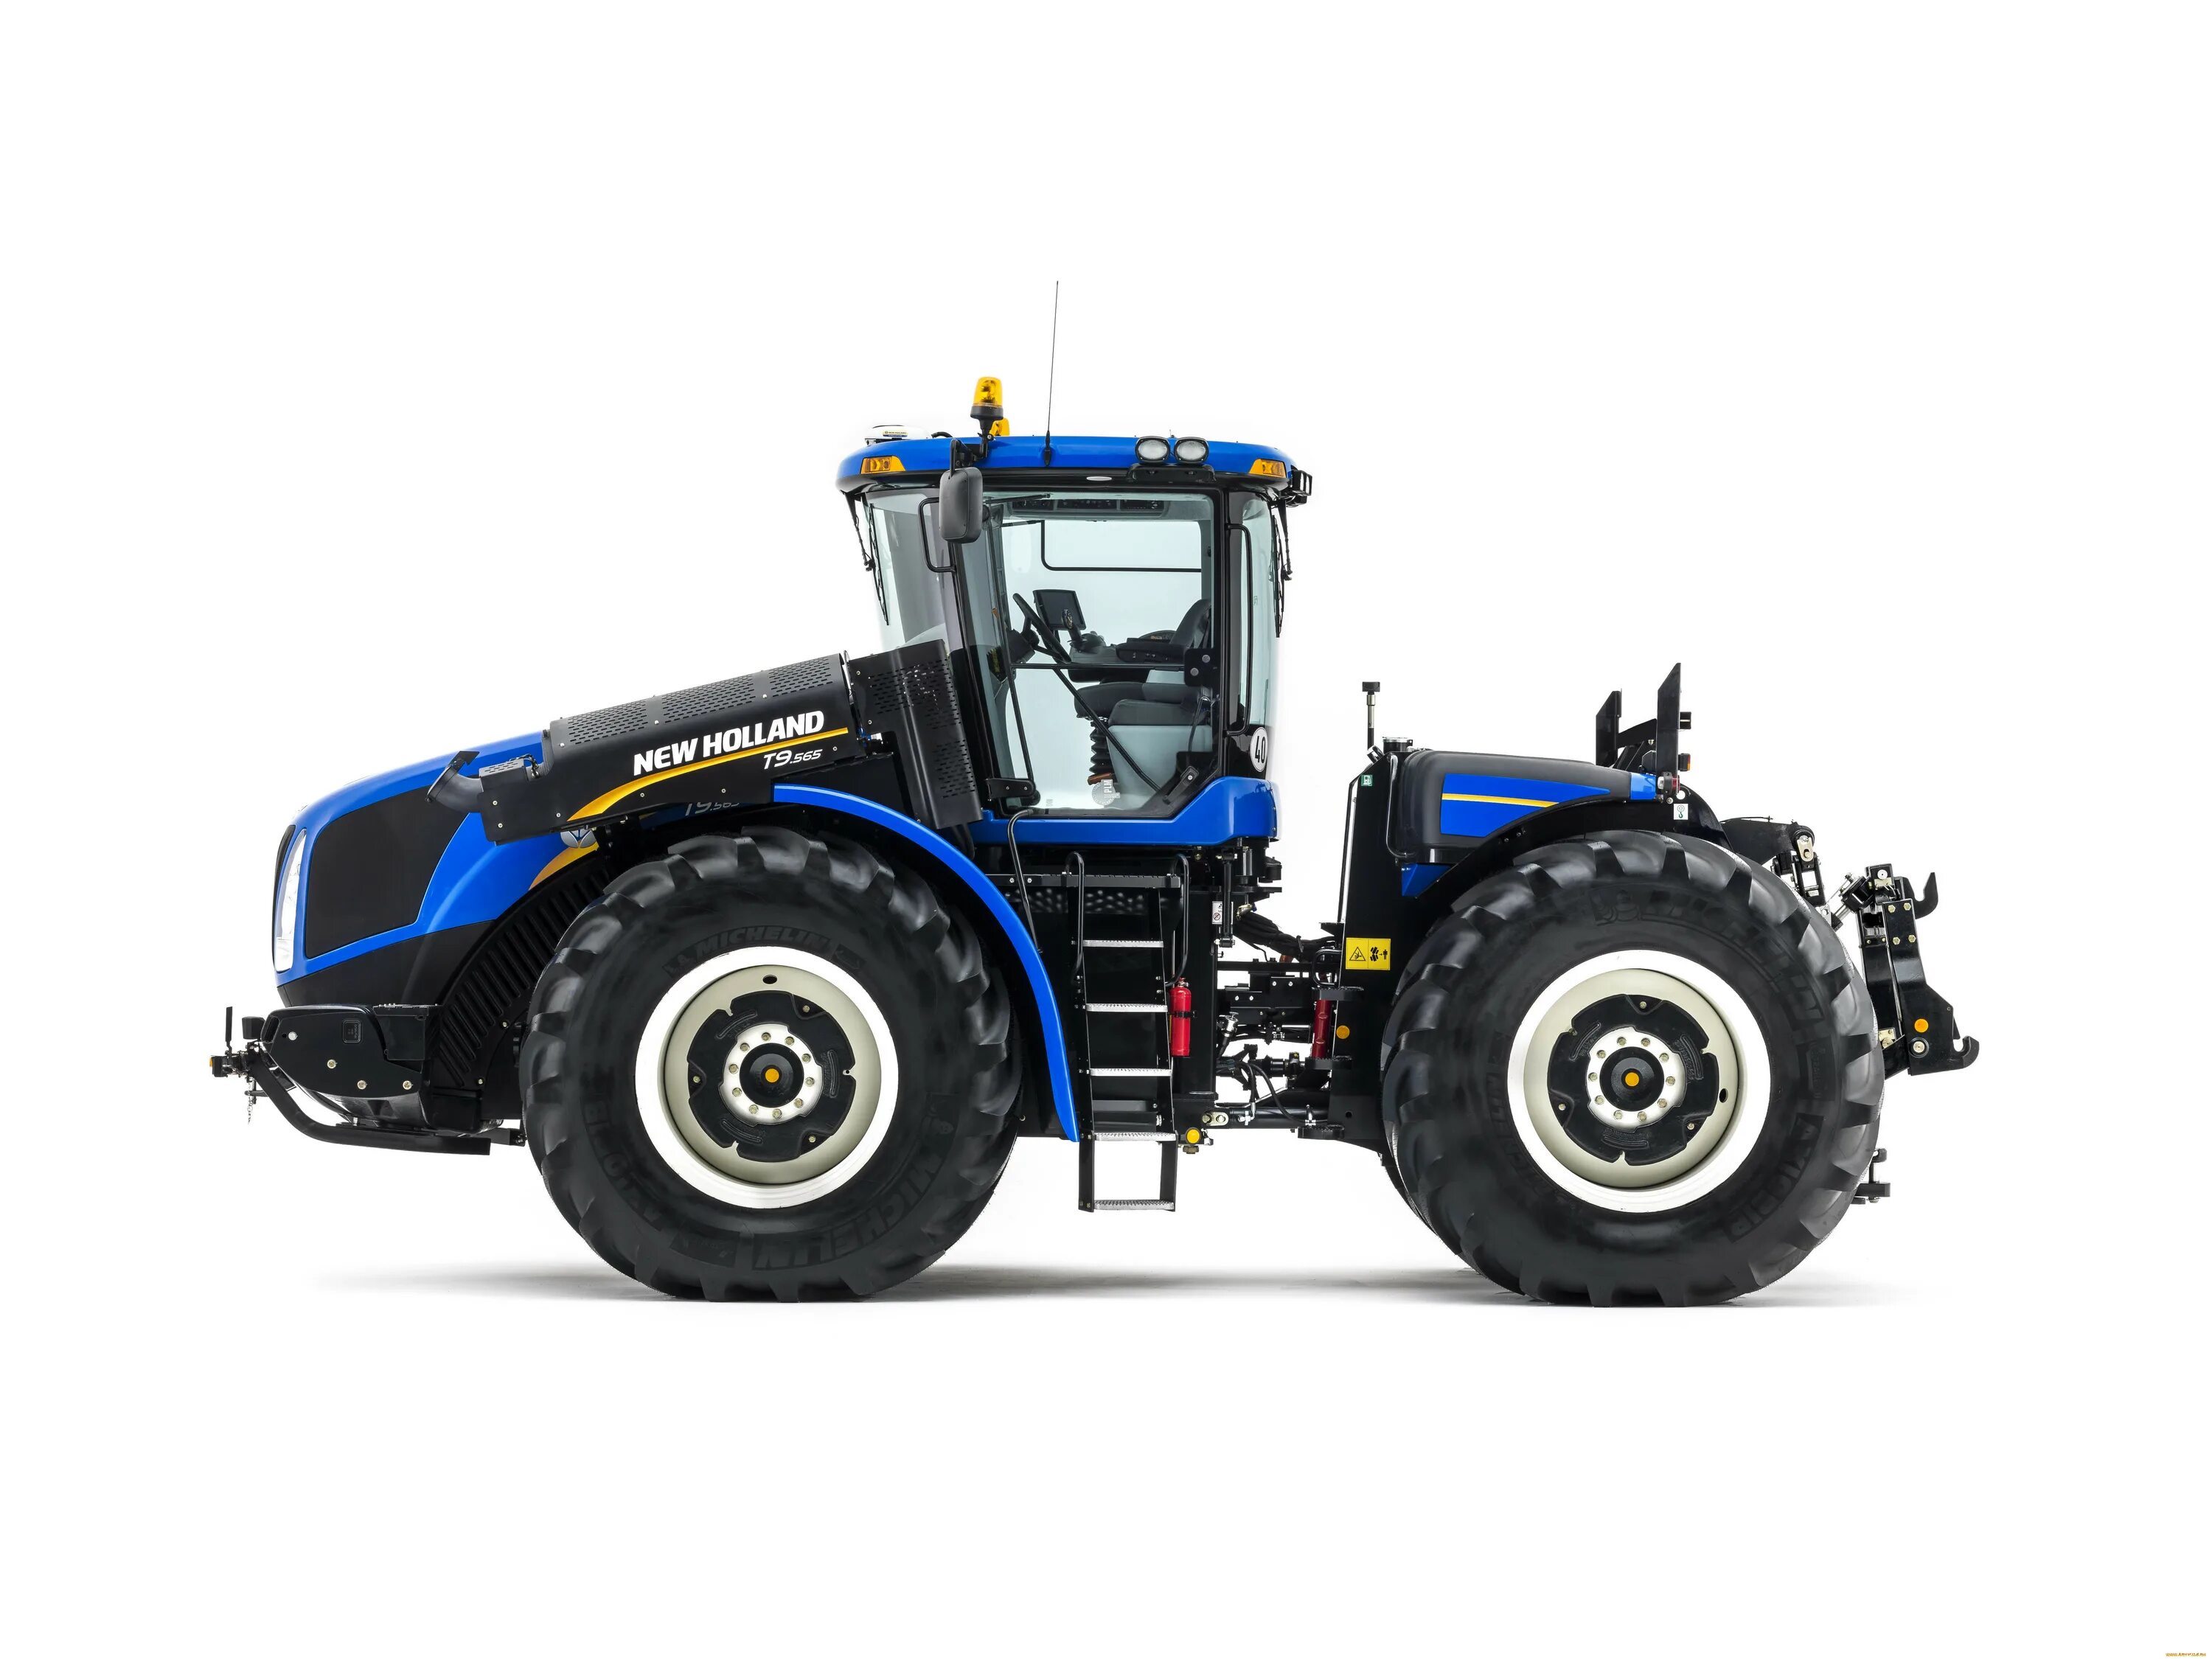 New holland t. Трактор New Holland t9. Трактор Нью Холланд т 9 700. Нью Холланд трактор т9505. Трактор New Holland t9.505.